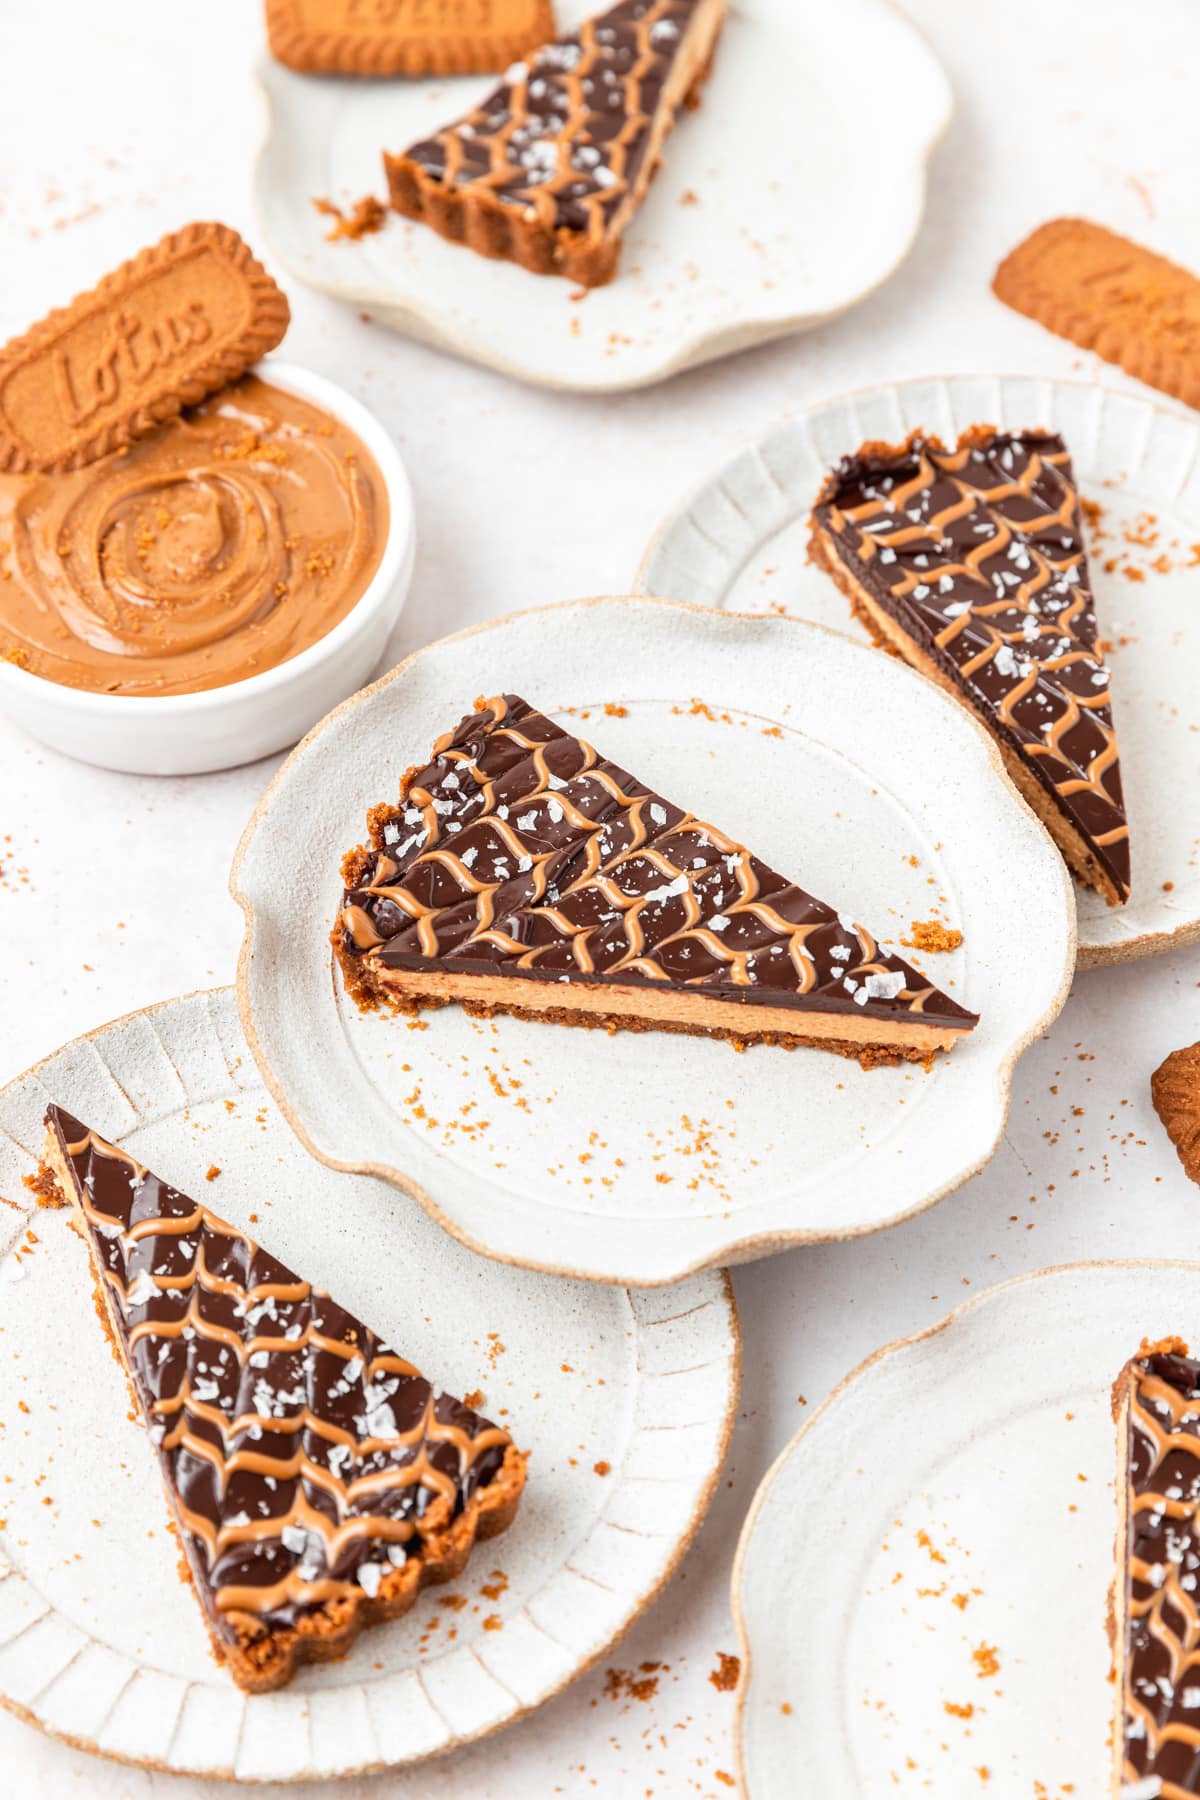 biscoff cookie butter tart with chocolate and sea salt.